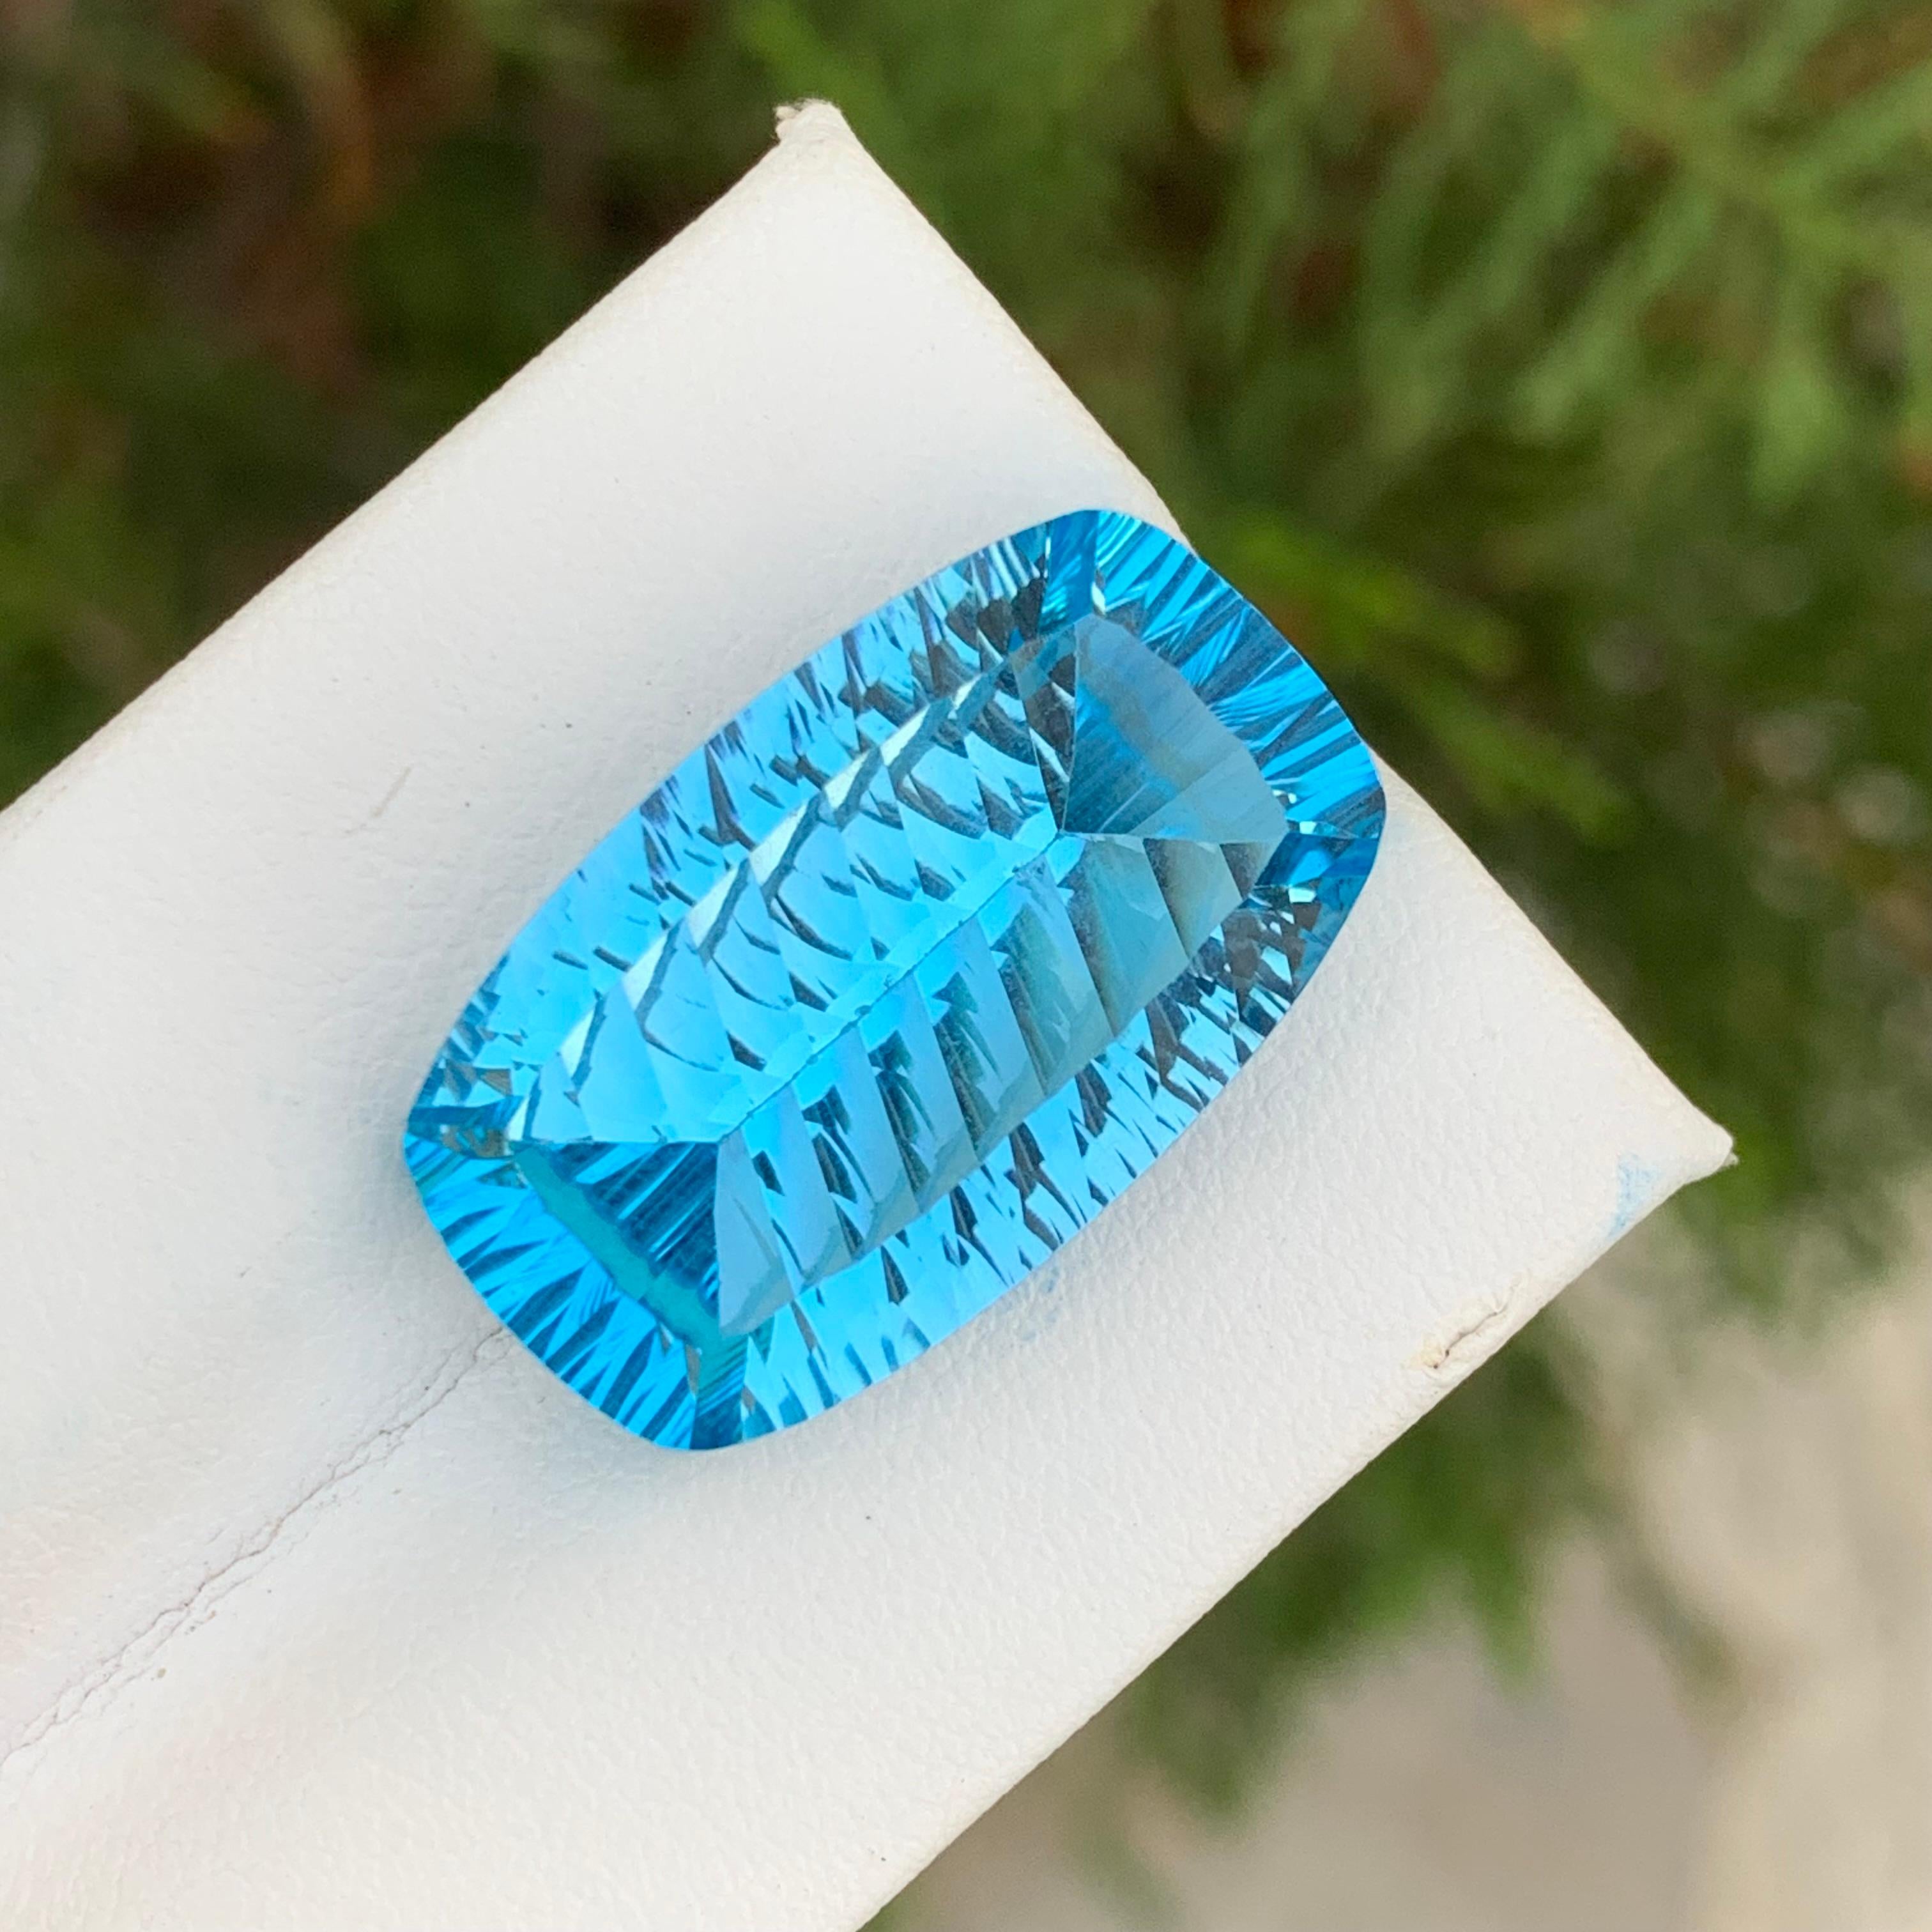 Faceted Natural Blue Topaz
Weight: 28.25 Carats 
Dimension: 24x14.5x9.1 Mm
Origin: Brazil
Shape: Oval
Cut/Facet: Laser Cut
Certificate: On Customer Demand 
Blue topaz is a stunning and popular gemstone known for its striking blue hues. It's a member